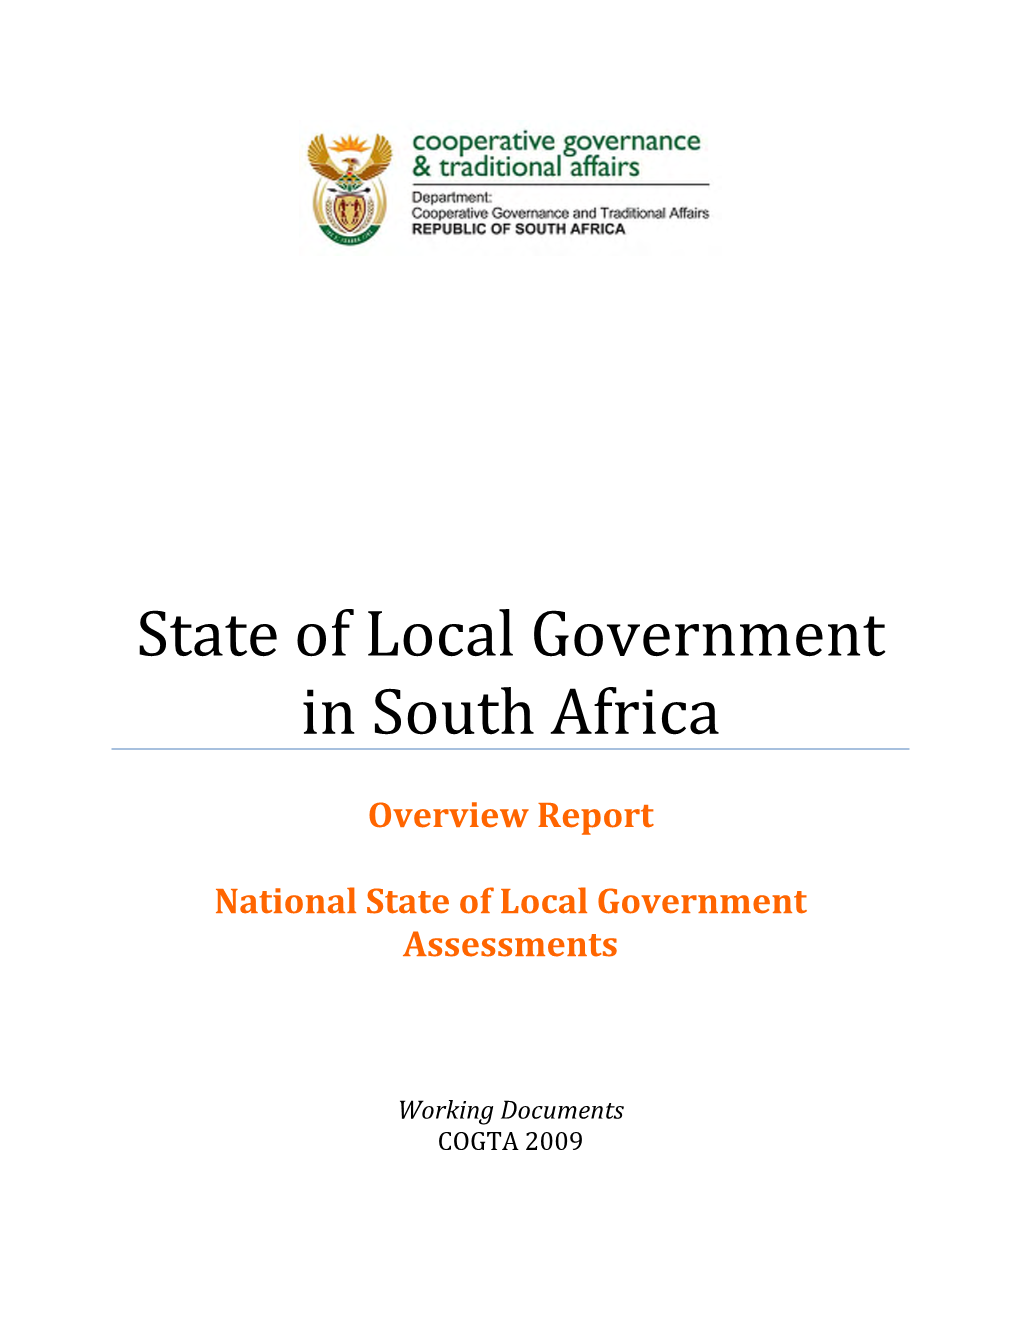 State of Local Government in South Africa